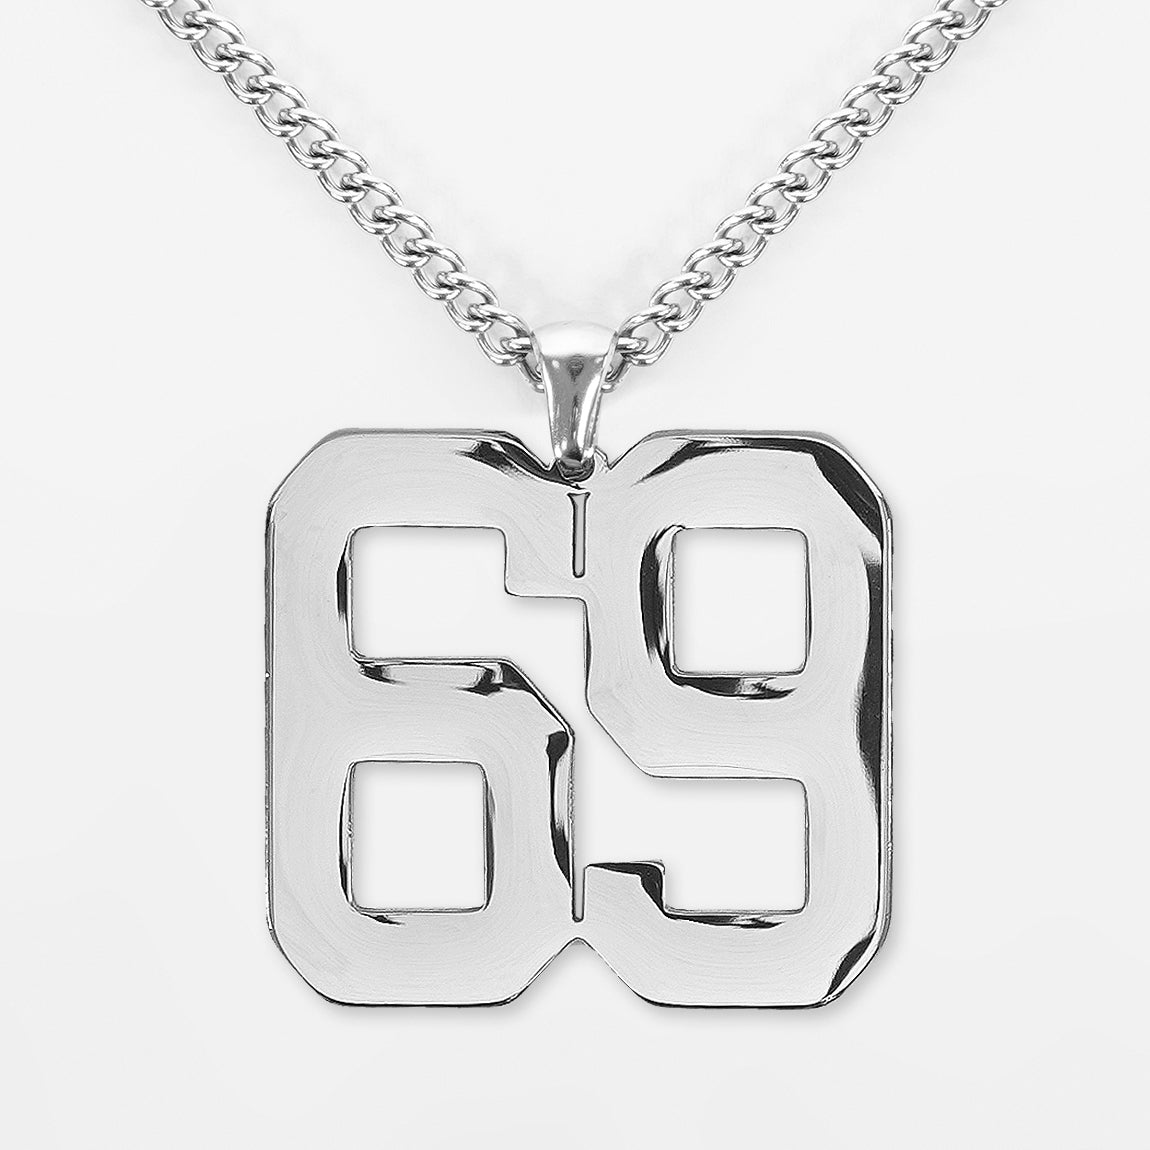 69 Number Pendant with Chain Necklace - Stainless Steel